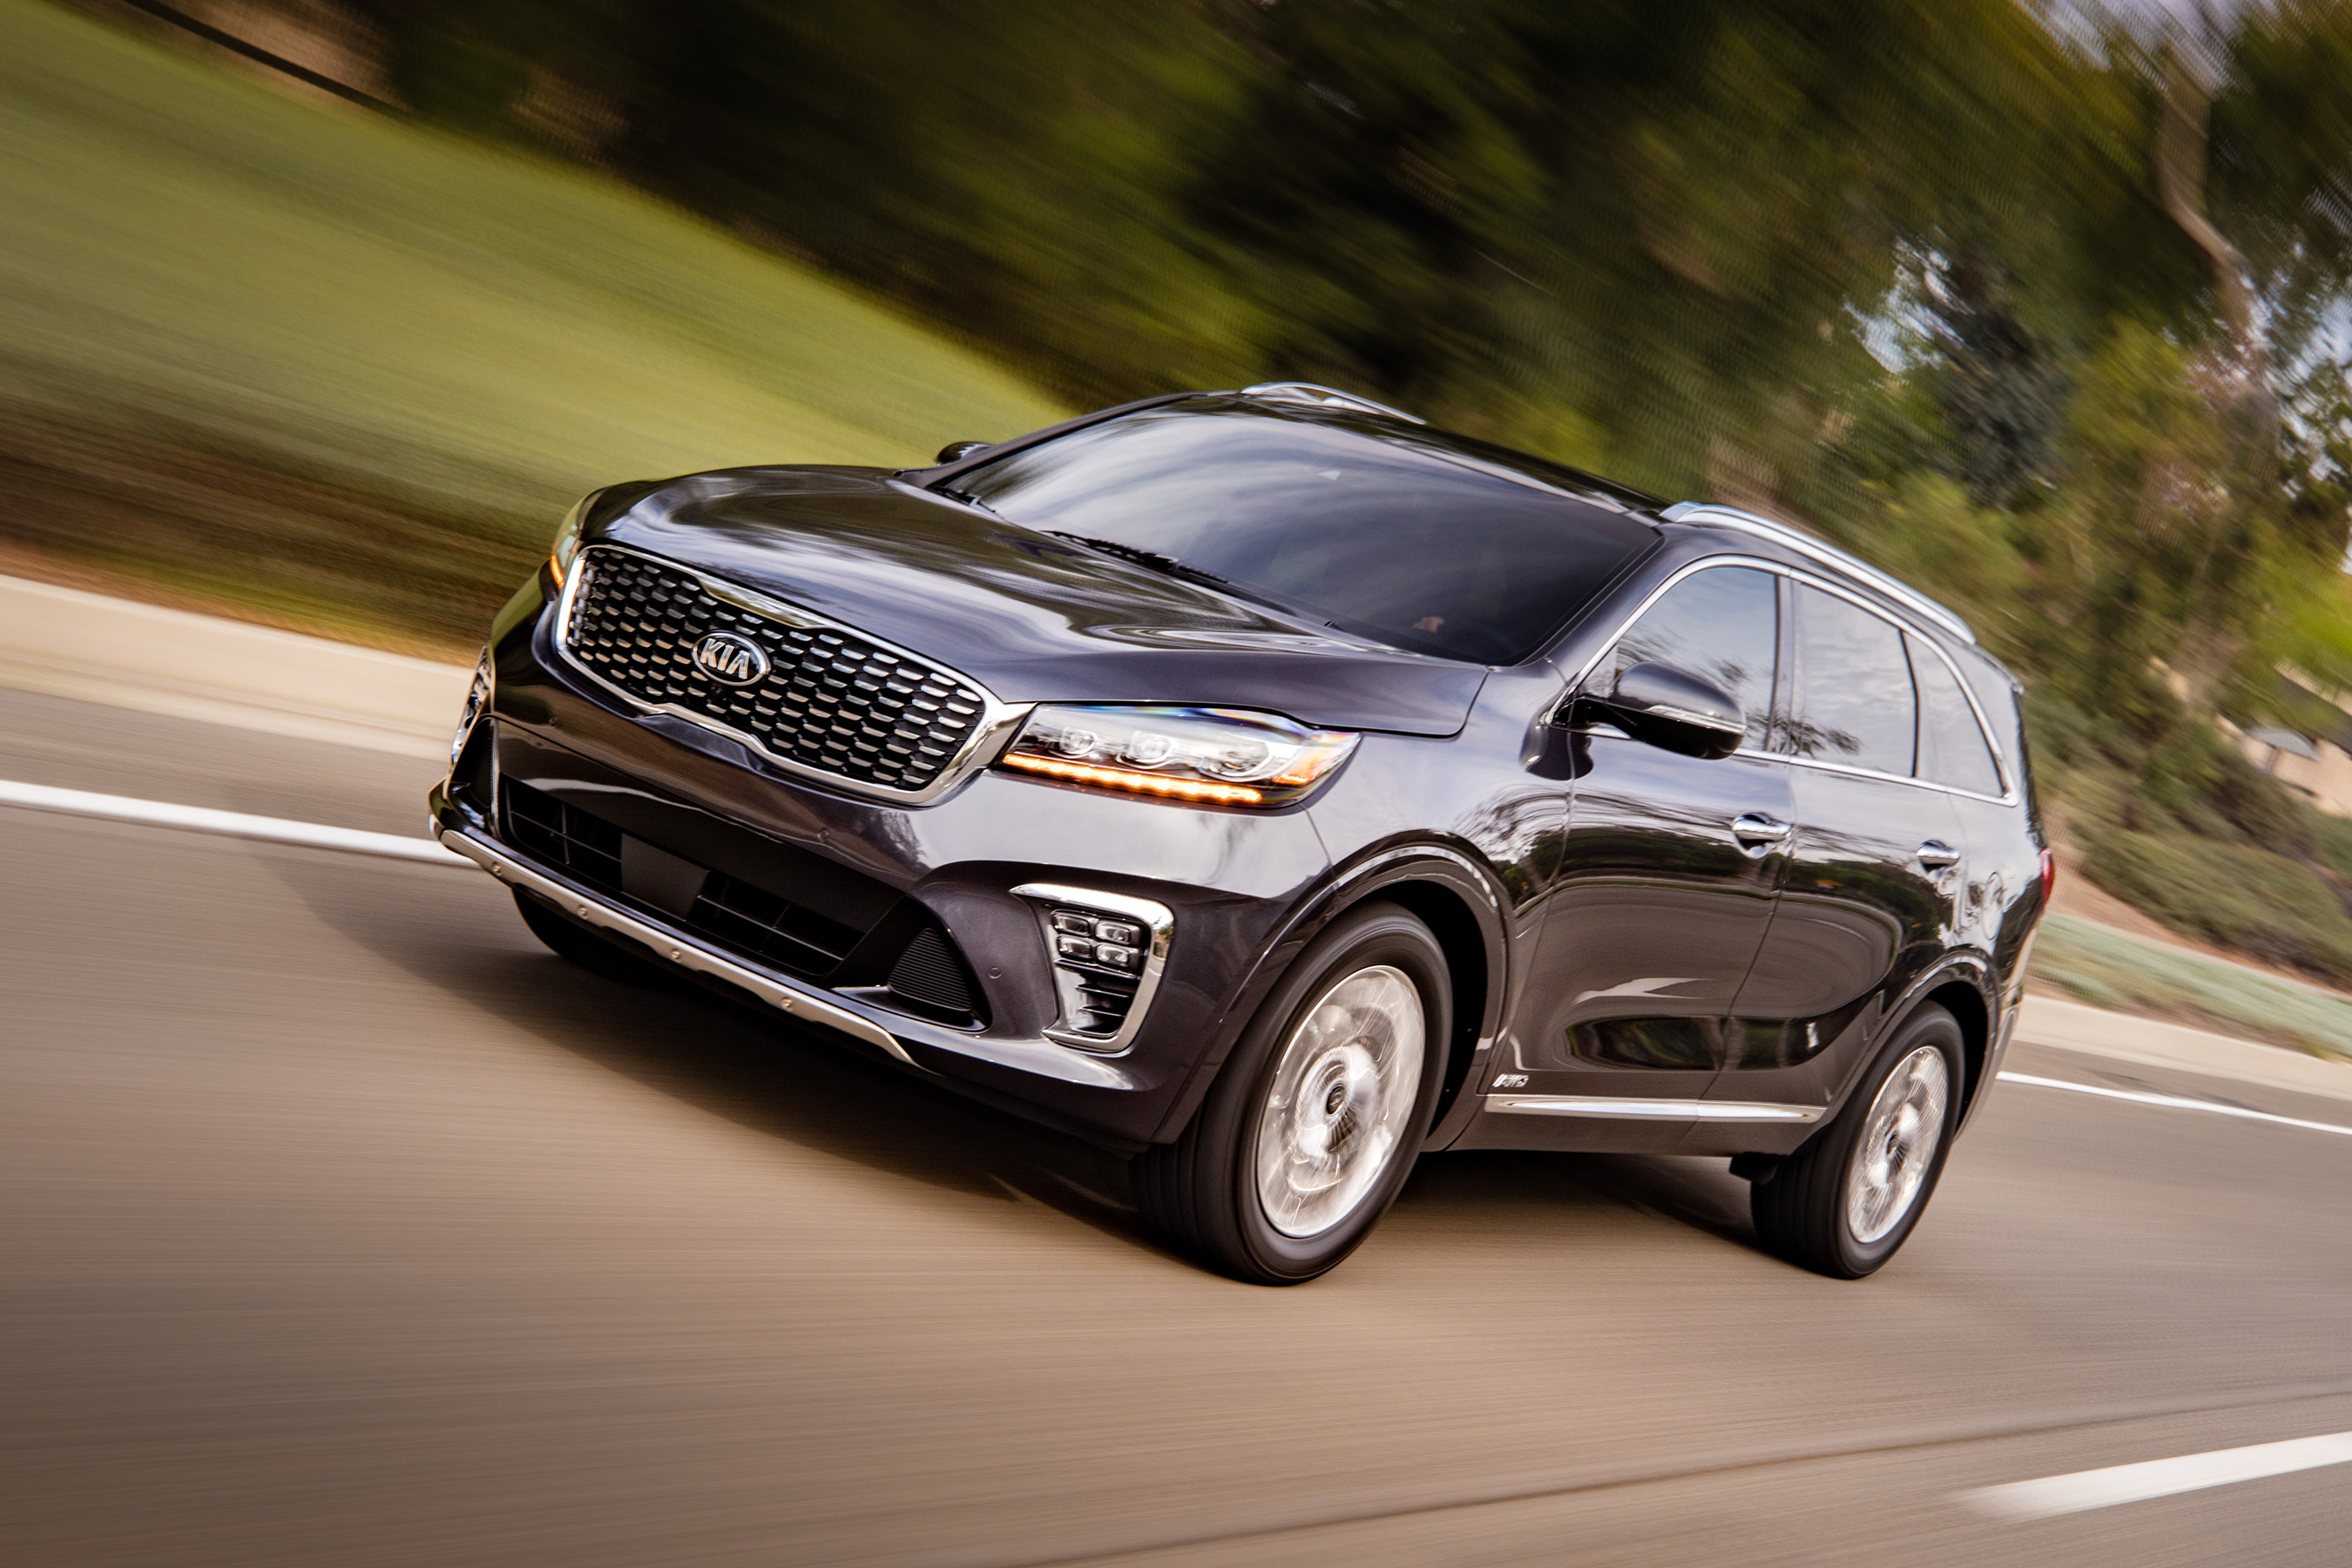 2019 Kia Sorento enjoys numerous exterior and interior enhancements to achieve a more refined and sophisticated look. The utility’s performance is elevated with an available new 8-speed automatic transmission.